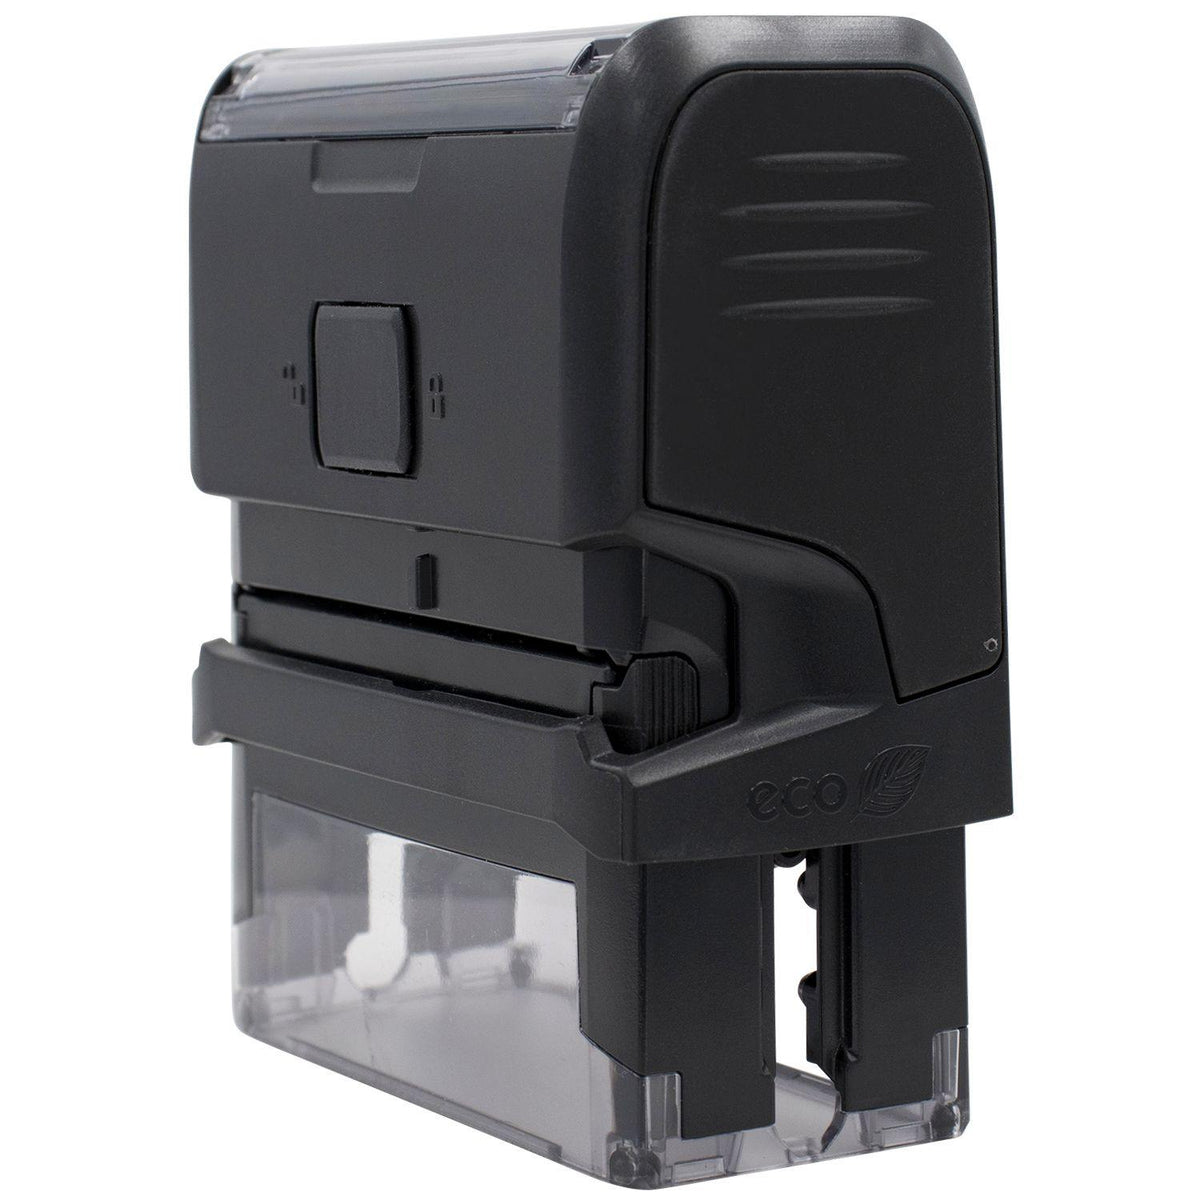 Side View of Large Self-Inking Barcode Confidential Stamp at an Angle